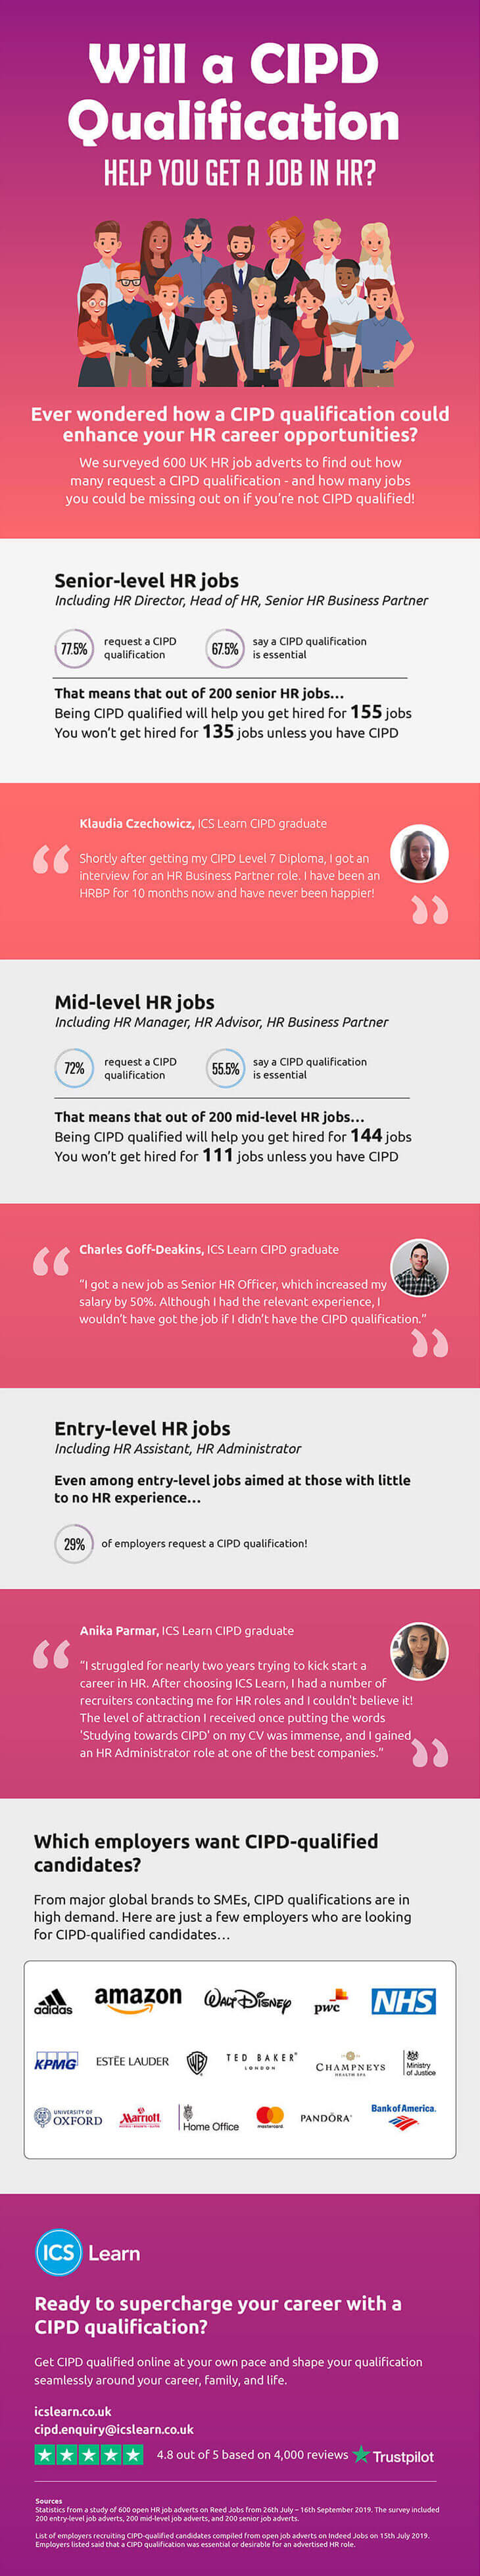 Ics Learn Will A Cipd Qualification Help You Get A Job In Hr Infographic